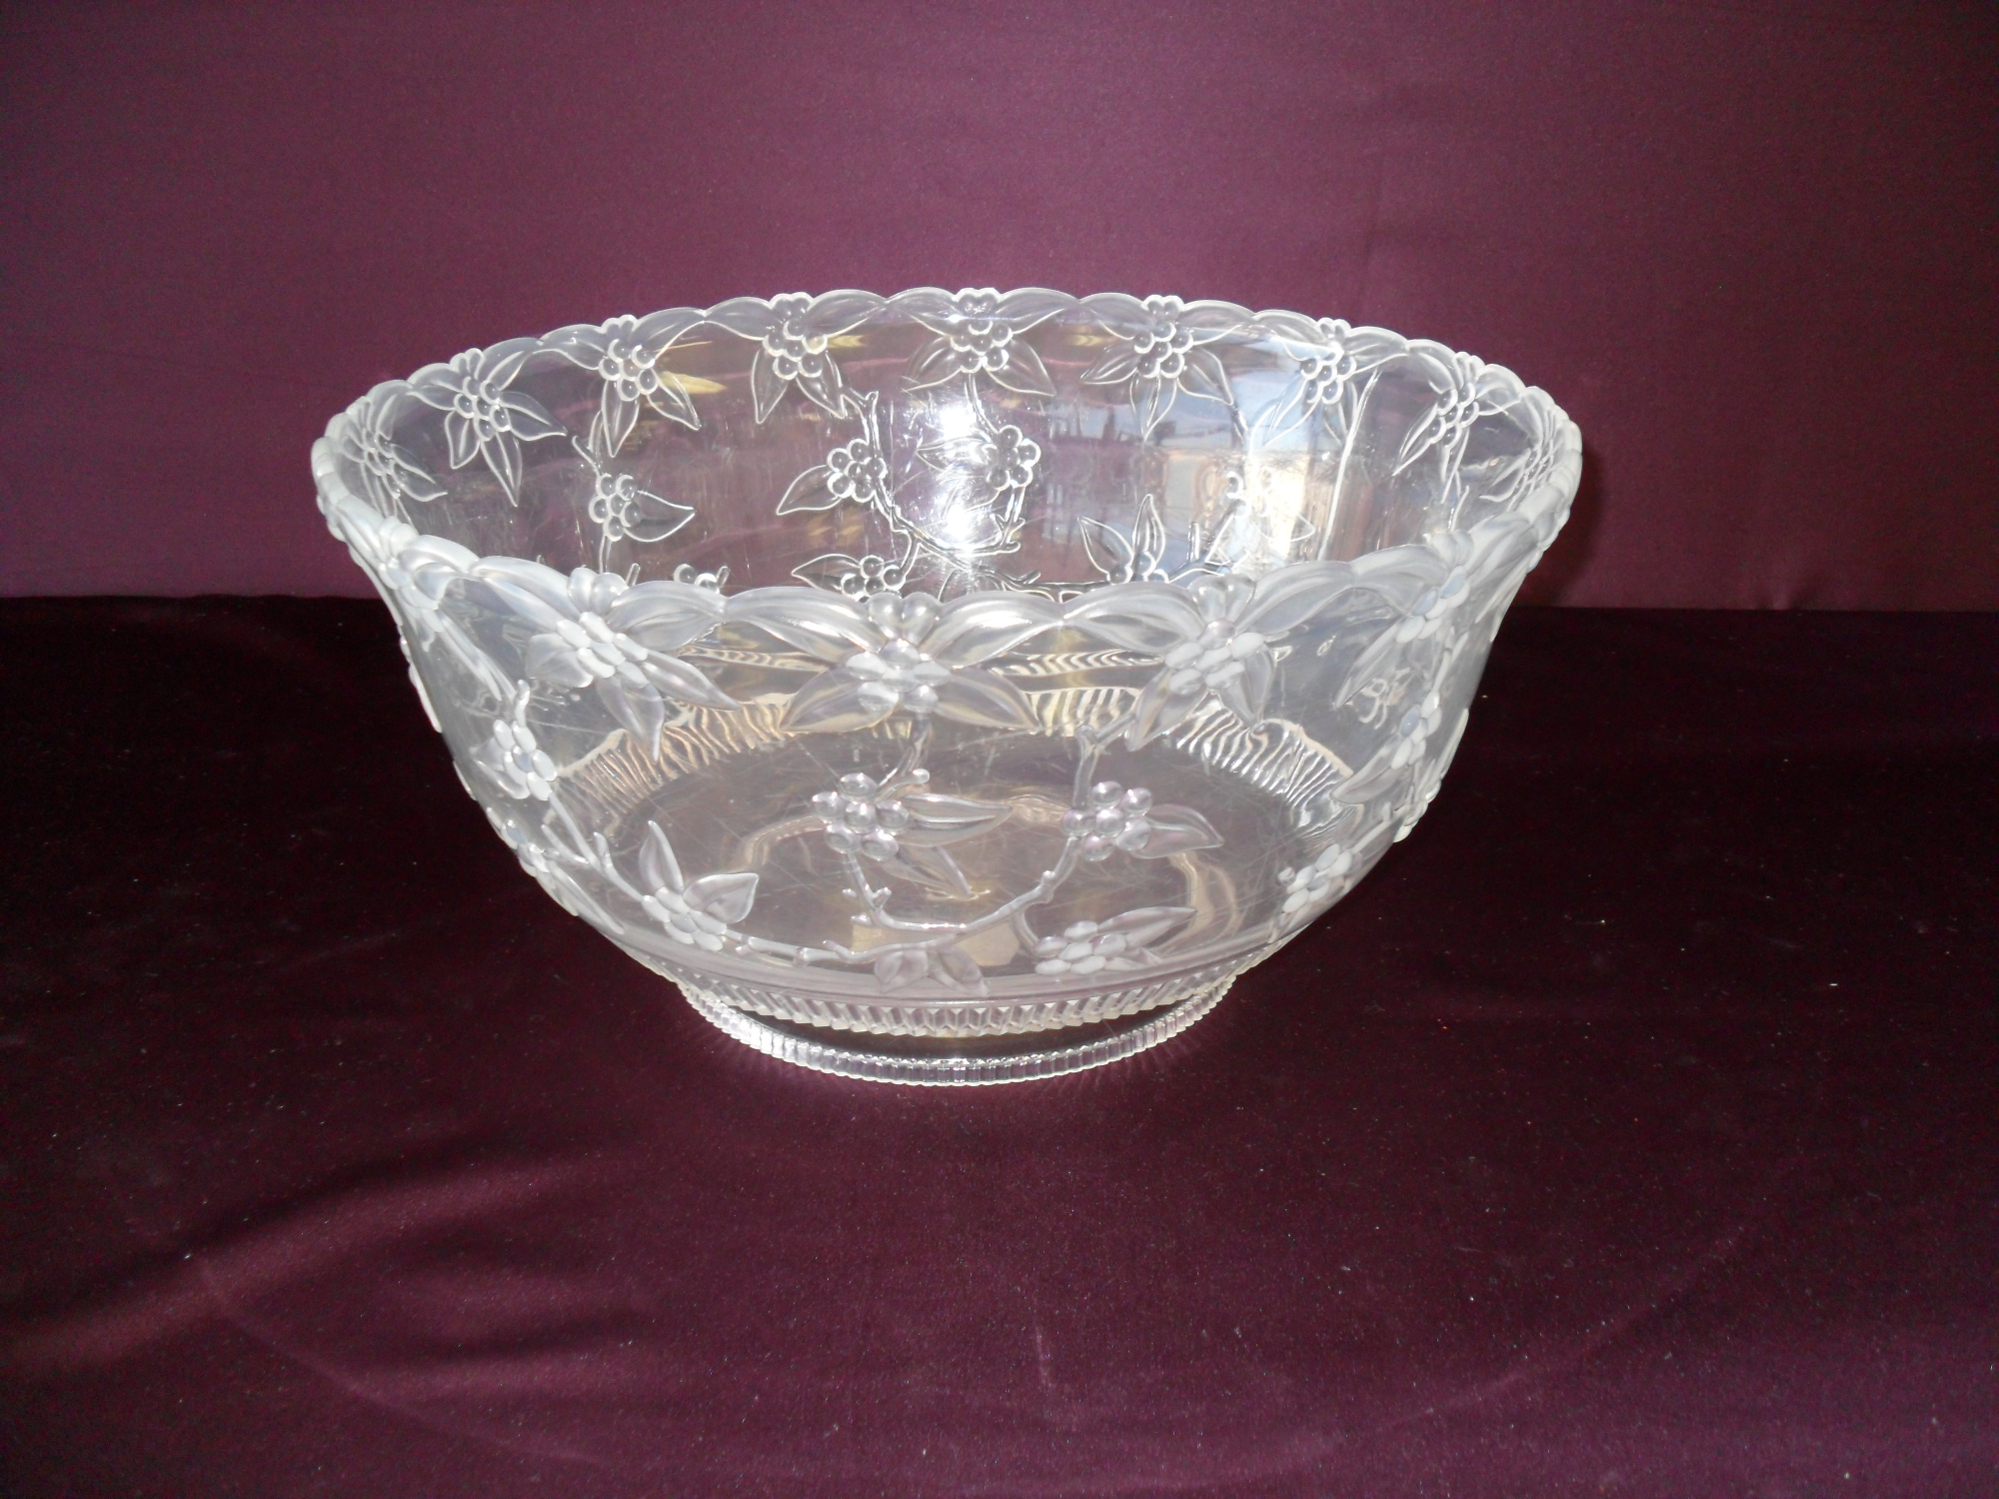 https://tlceventrentals.com/wp-content/uploads/2014/11/products-clear_plastic_bowl_with_floral_design.jpg